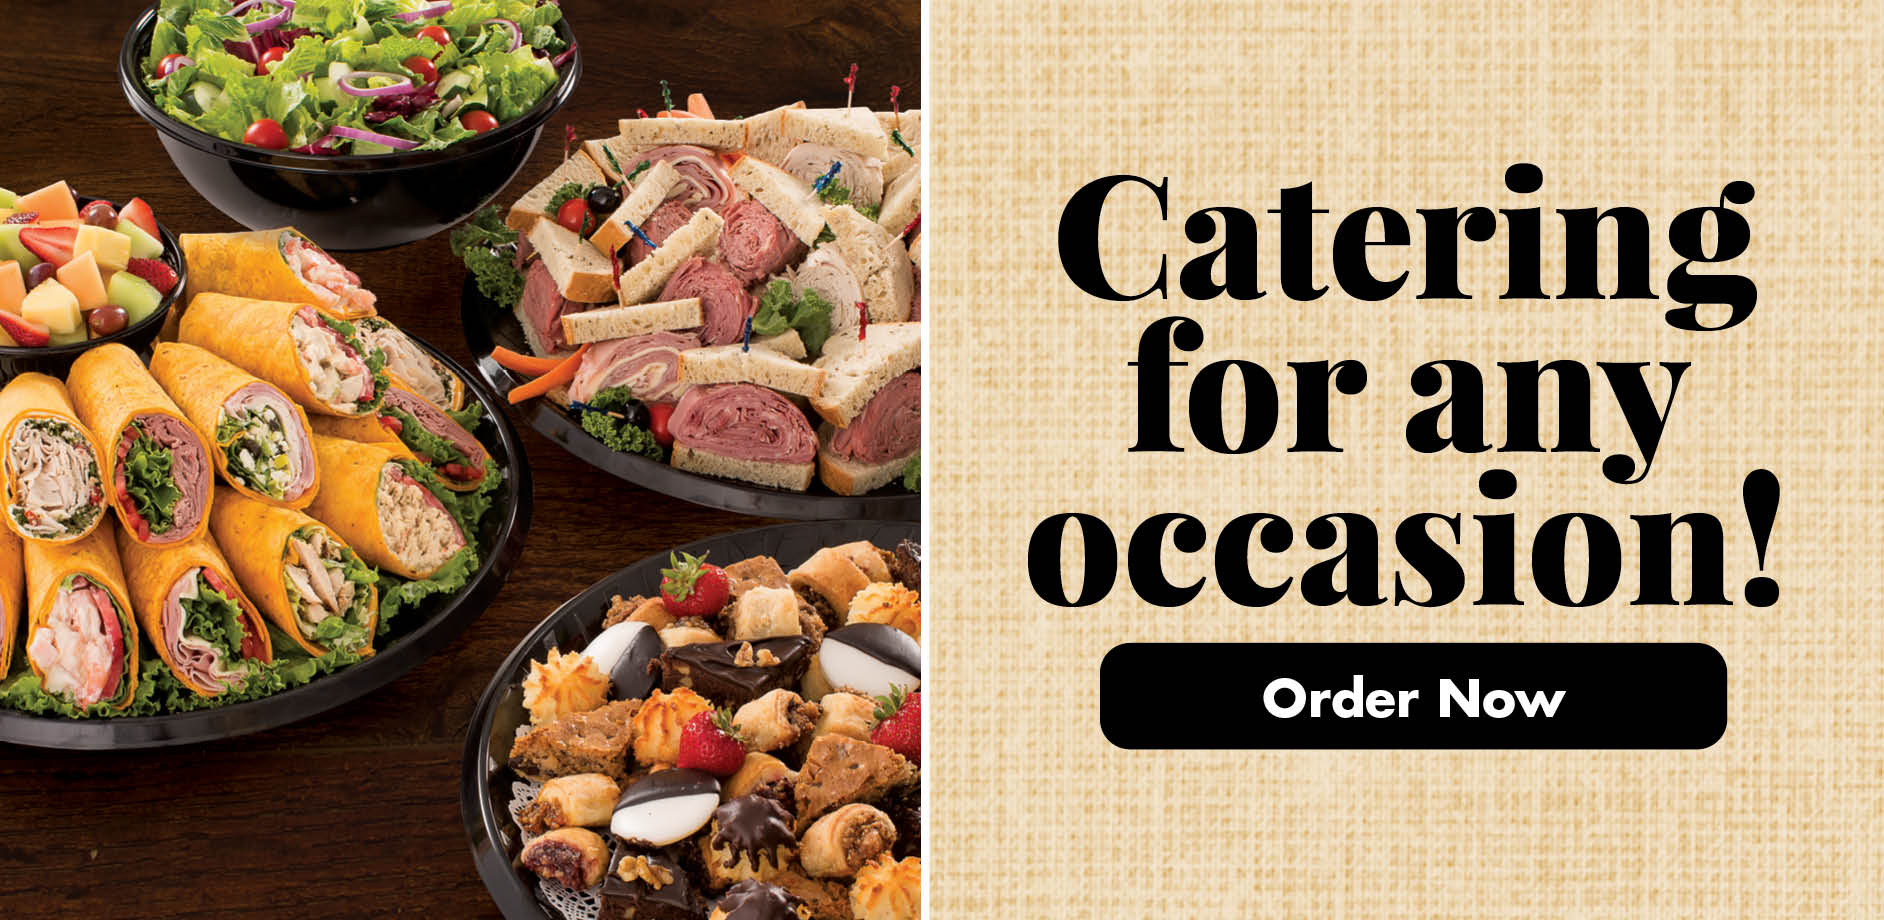 Catering for any occasion! Click to order now!